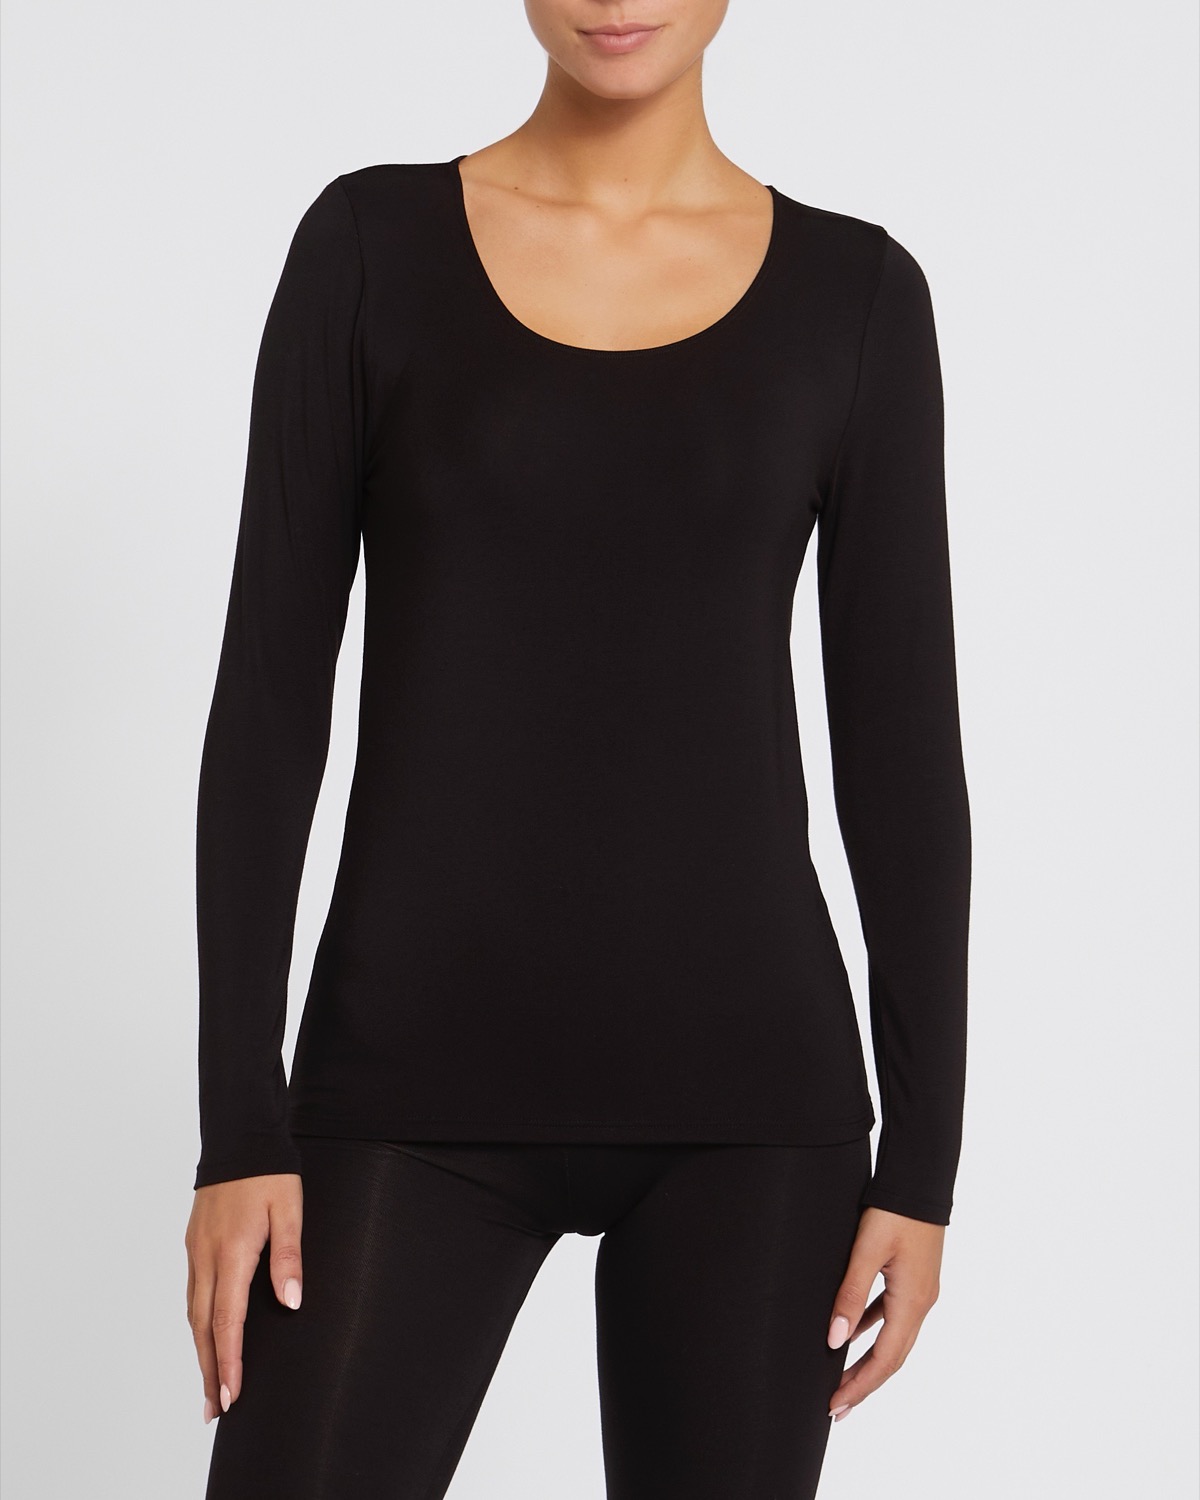 Dunnes Stores  Black Thermal Heat Activate Long Sleeved Top